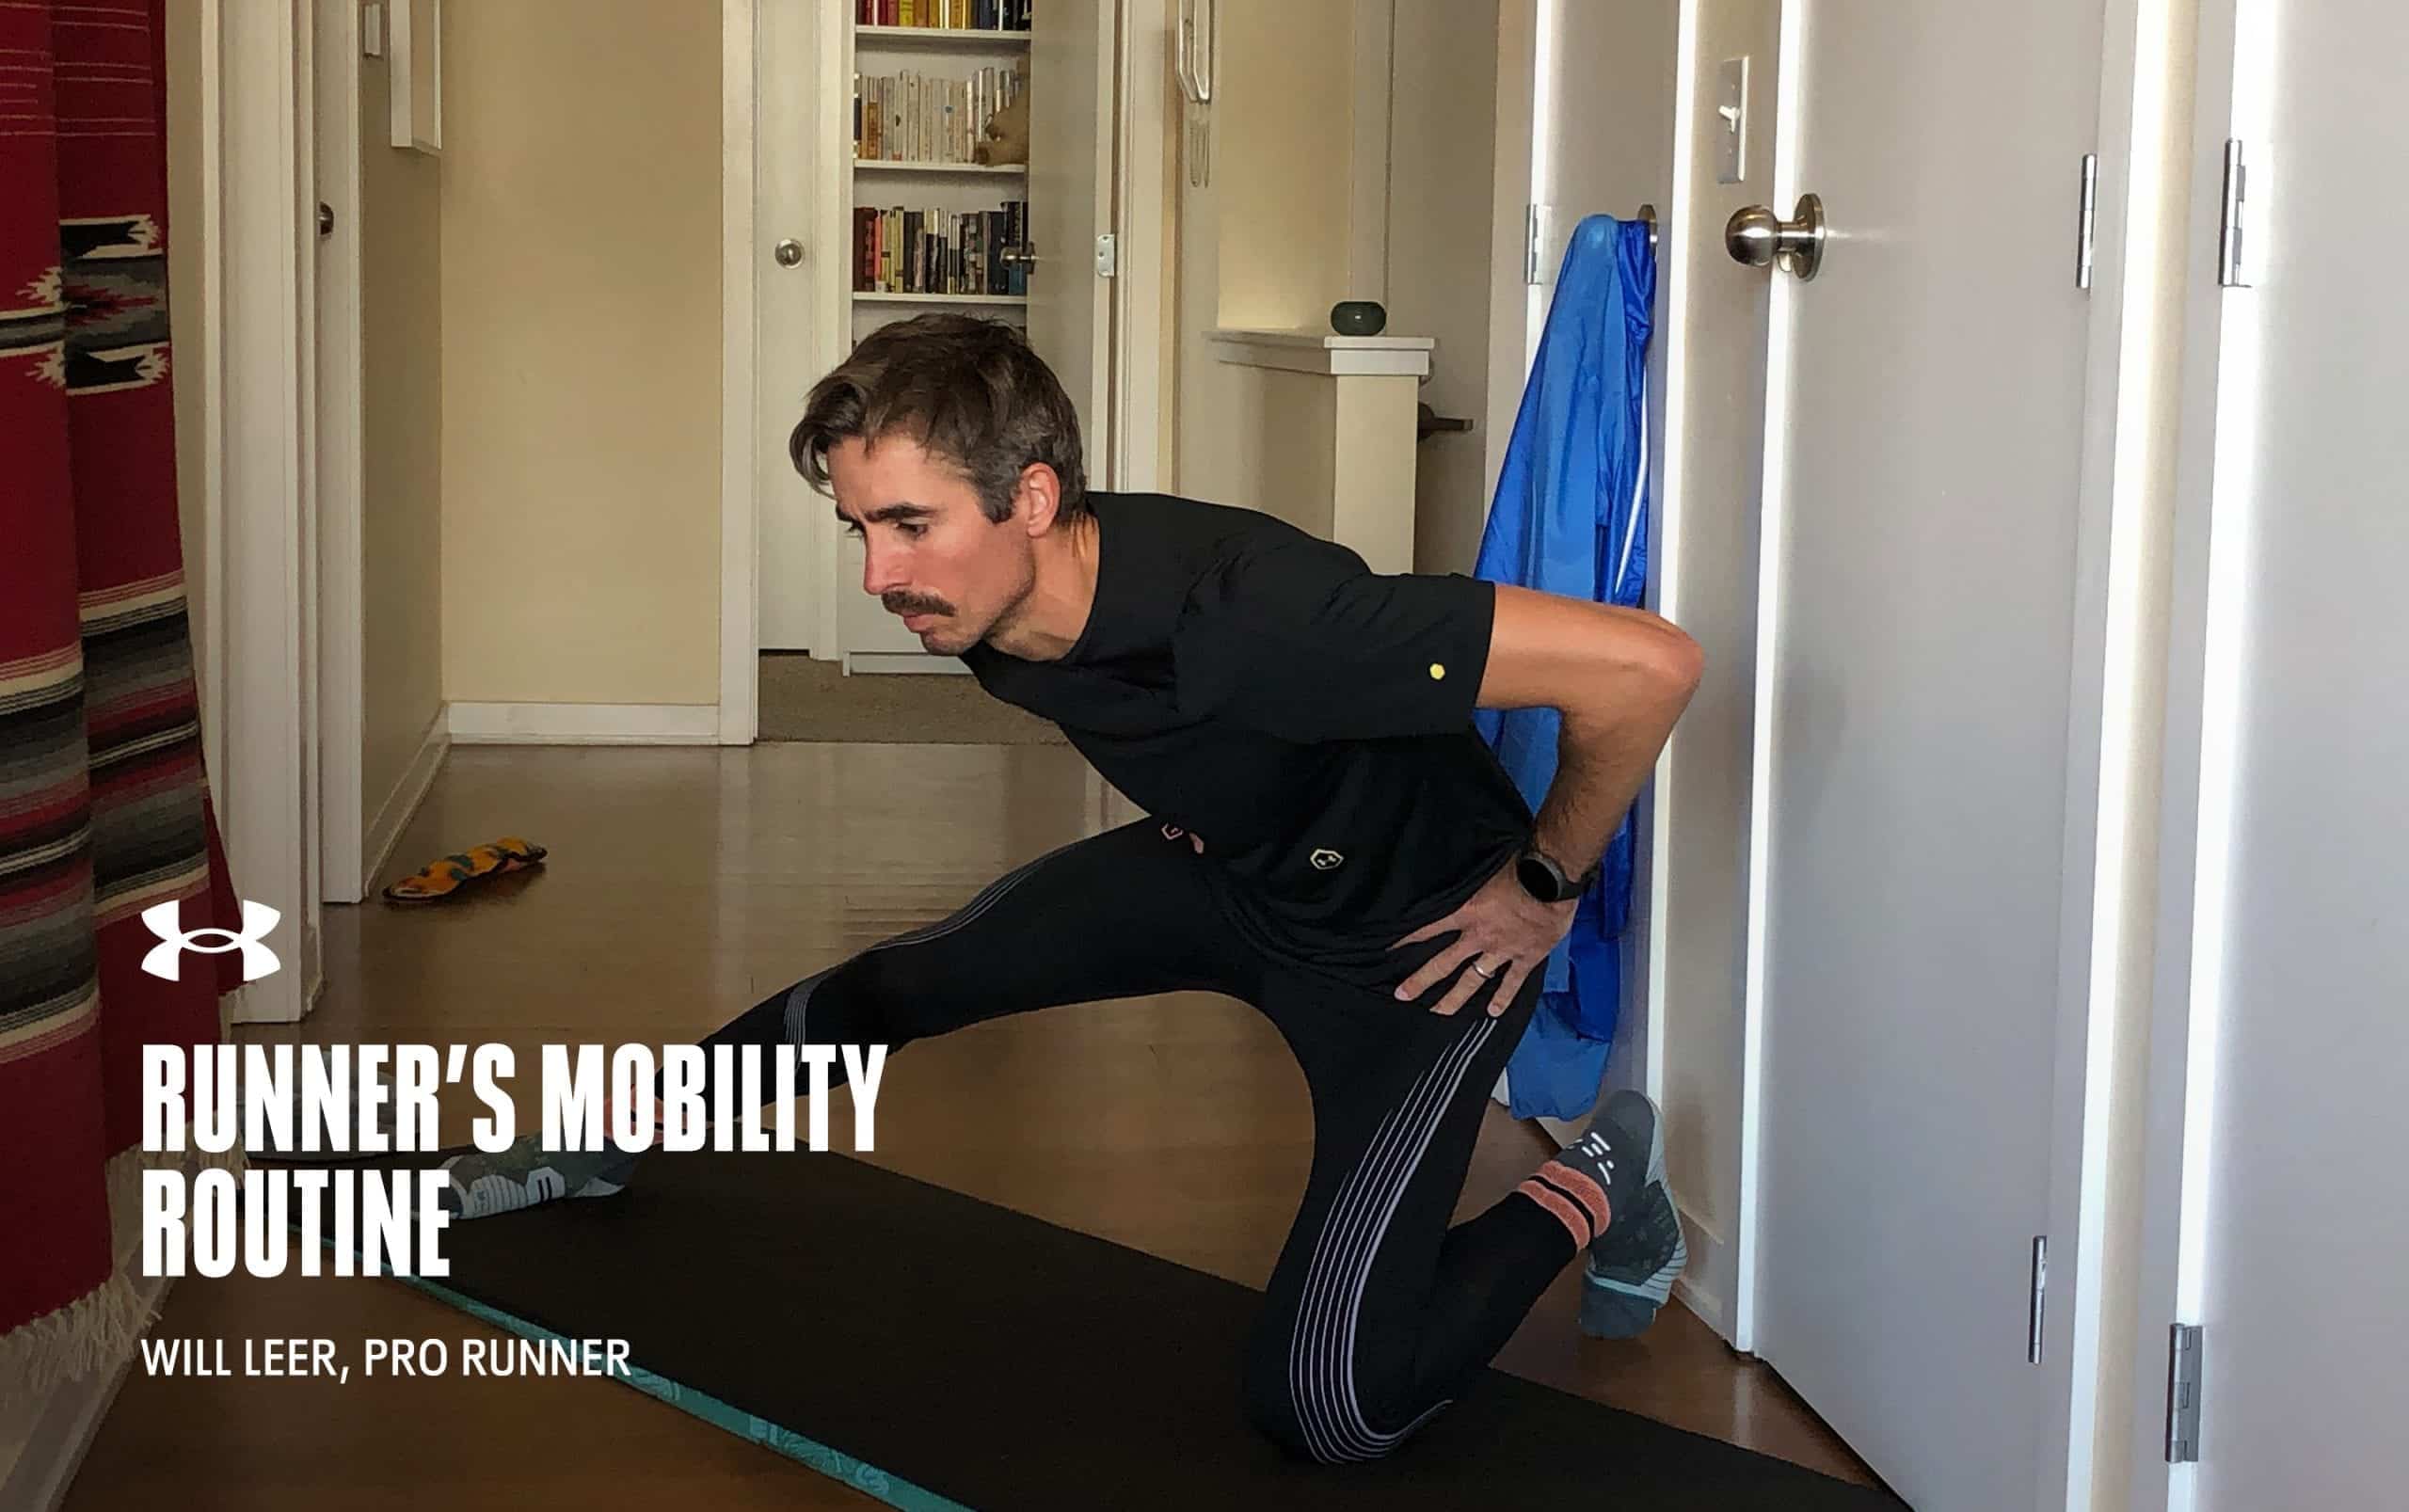 Runner’s Mobility Routine